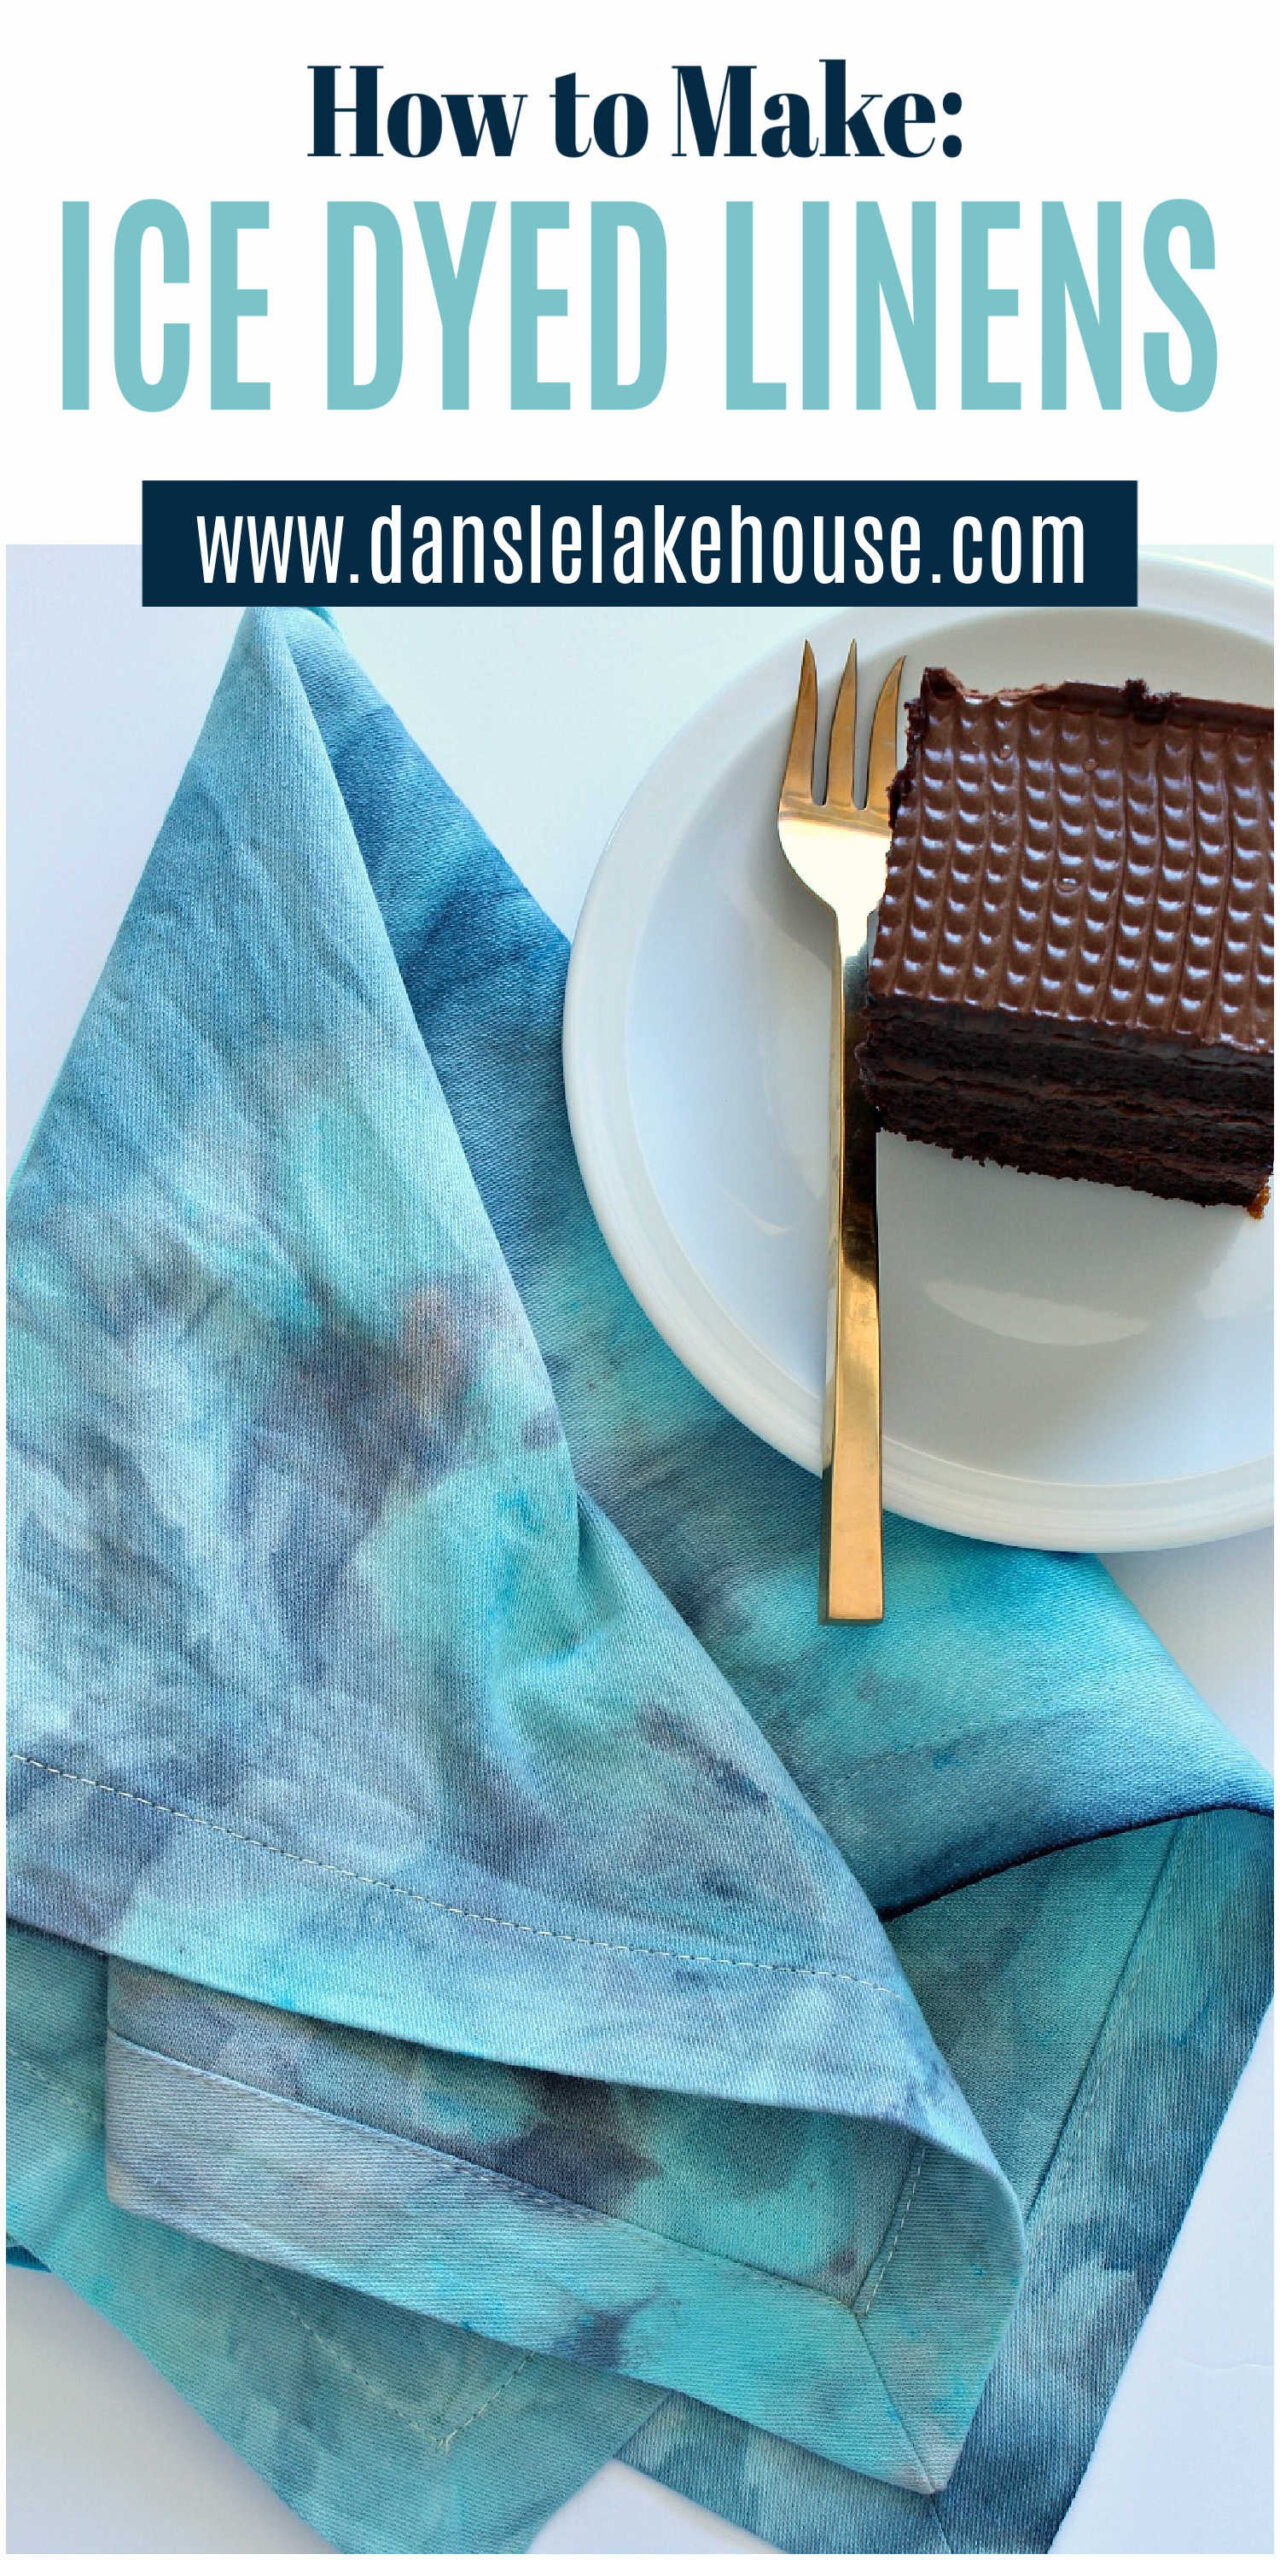 How to Make Ice Dyed Linens